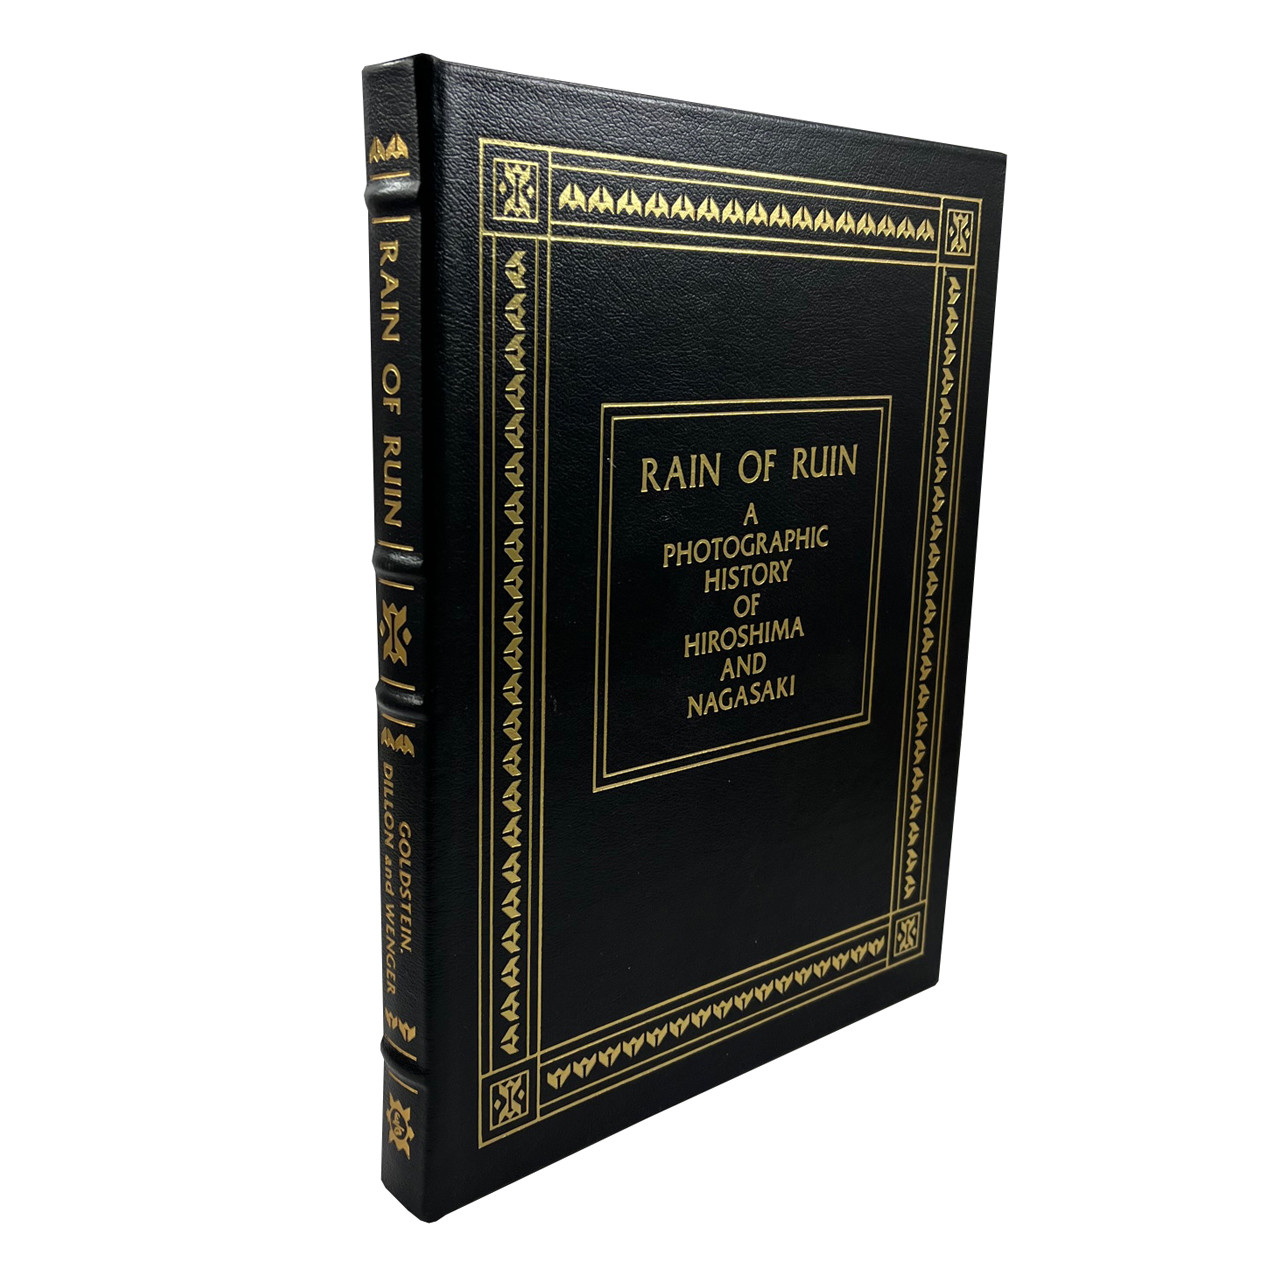 Donald M. Goldstein, Katherine V. Dillon, and J. Michael Wenger "Rain Of Ruin: A Photographic History of Hiroshima and Nagasaki" Deluxe Limited Edition, Leather Bound Collector's Edition